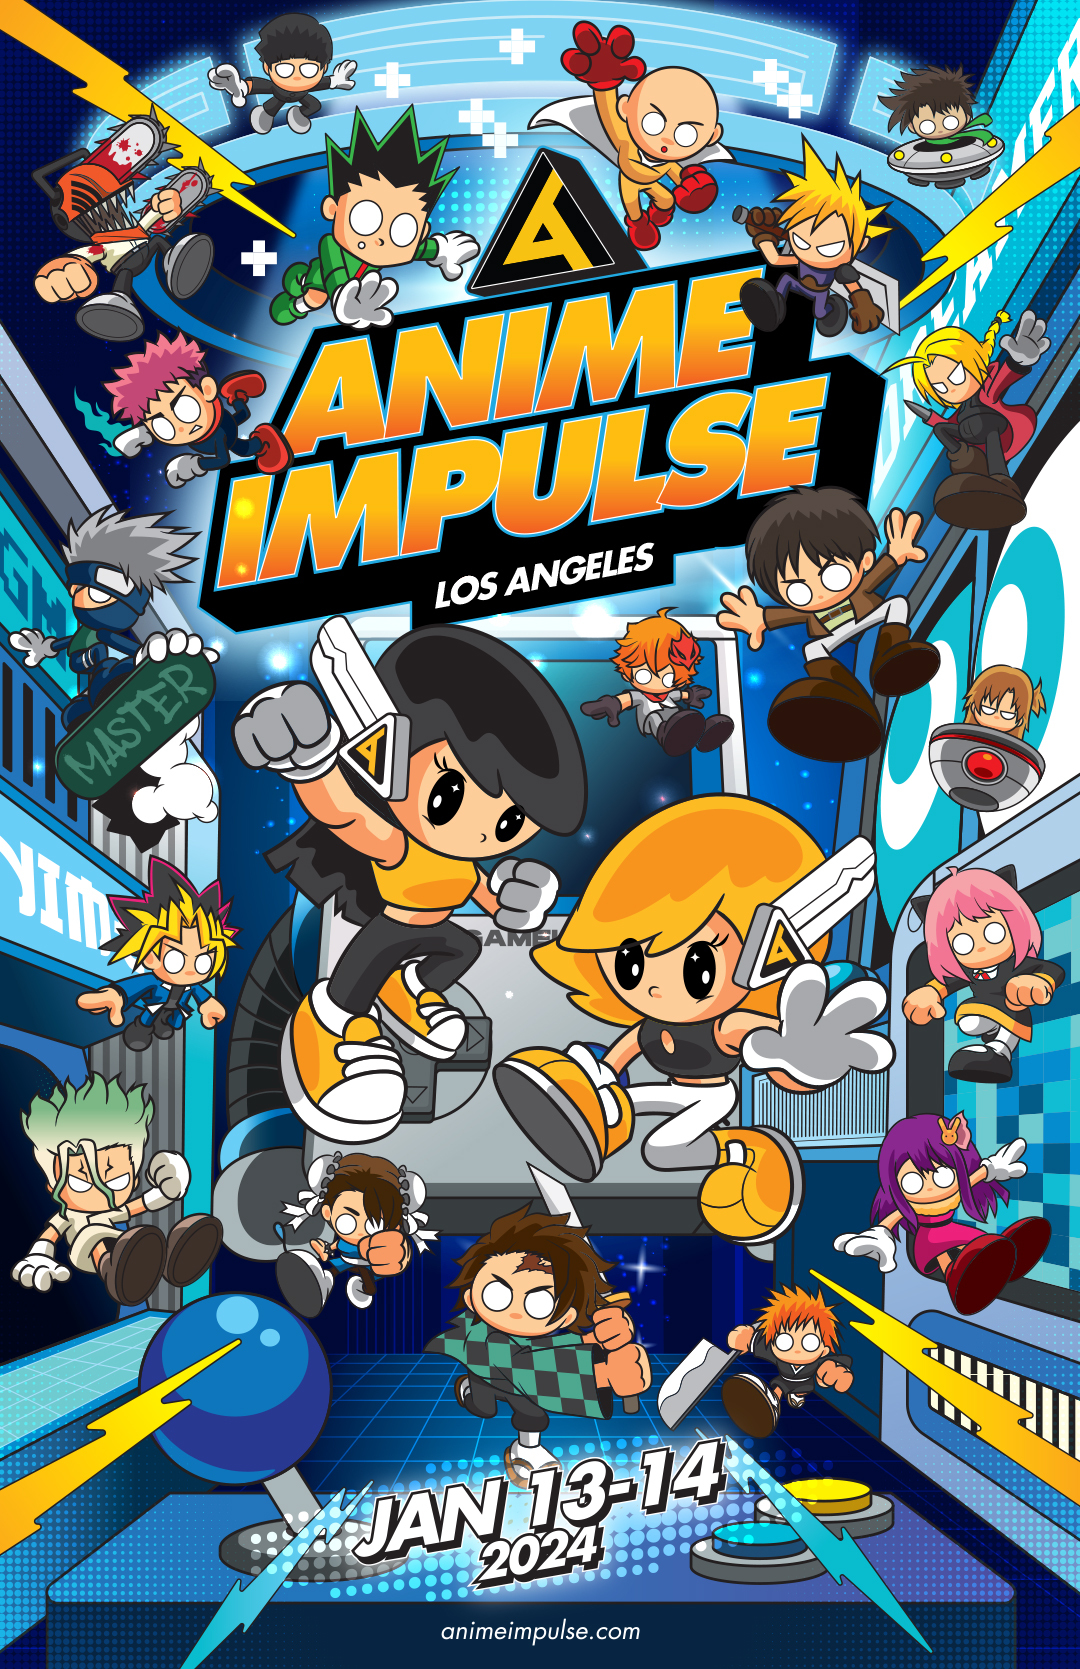 Discover 55+ anime impulse tickets - in.cdgdbentre